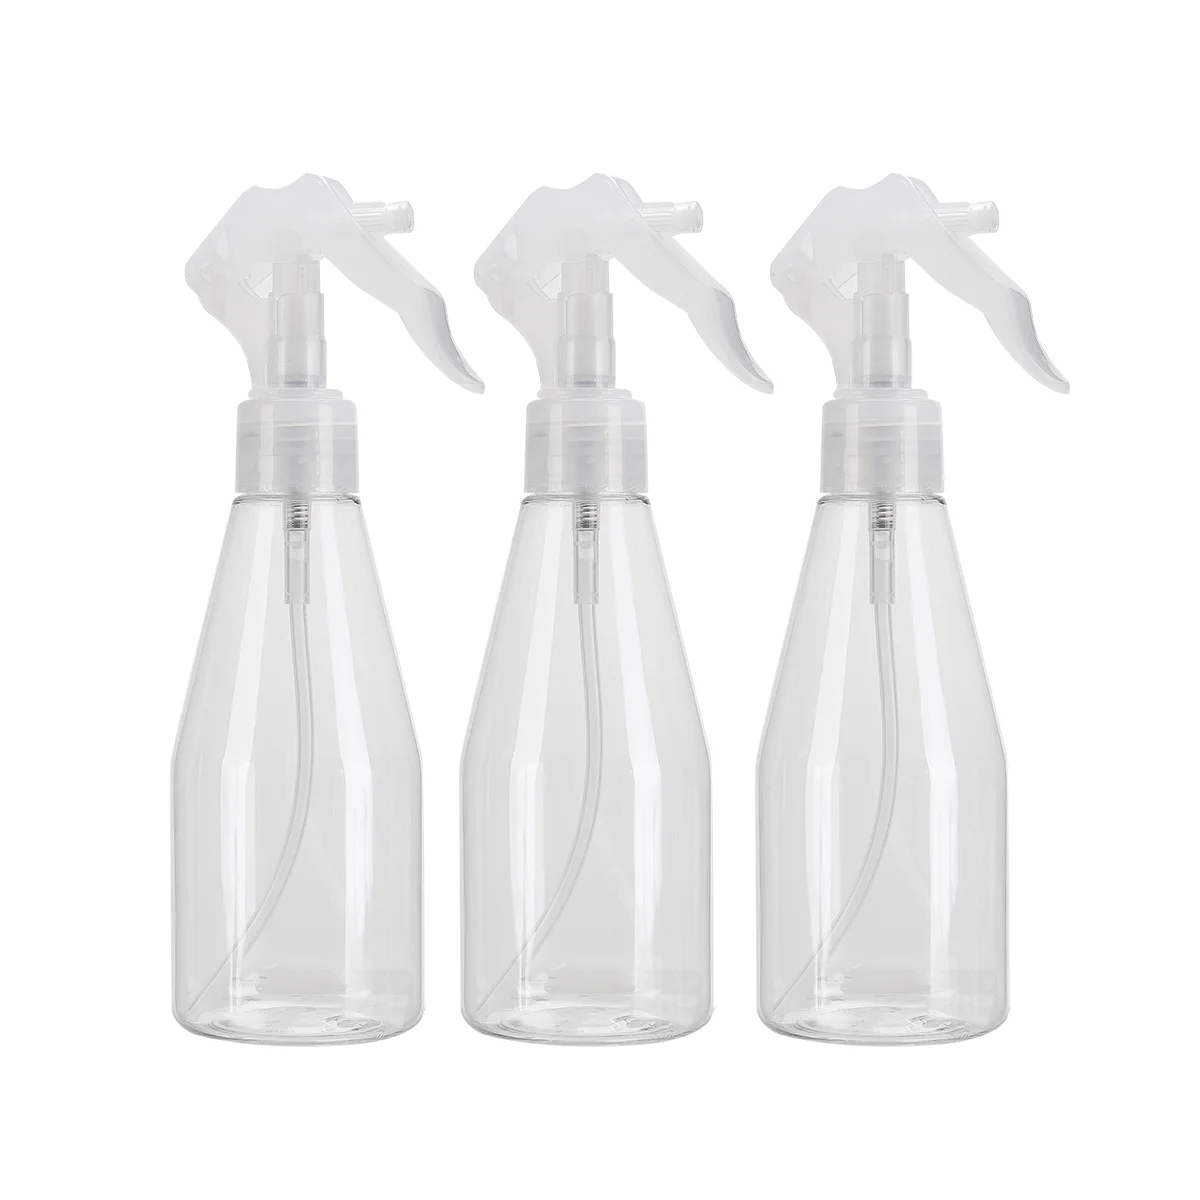 3 Pcs Spray Bottles For Hair Plastic 200ml Bottles Safe Odorless Sprayer Leak-proof Great for Cleaning Products Garden Beauty 1pcs transparent pe film elastic jewelry display ring earrings bracelet necklace storage hair clip badge holder dust proof box